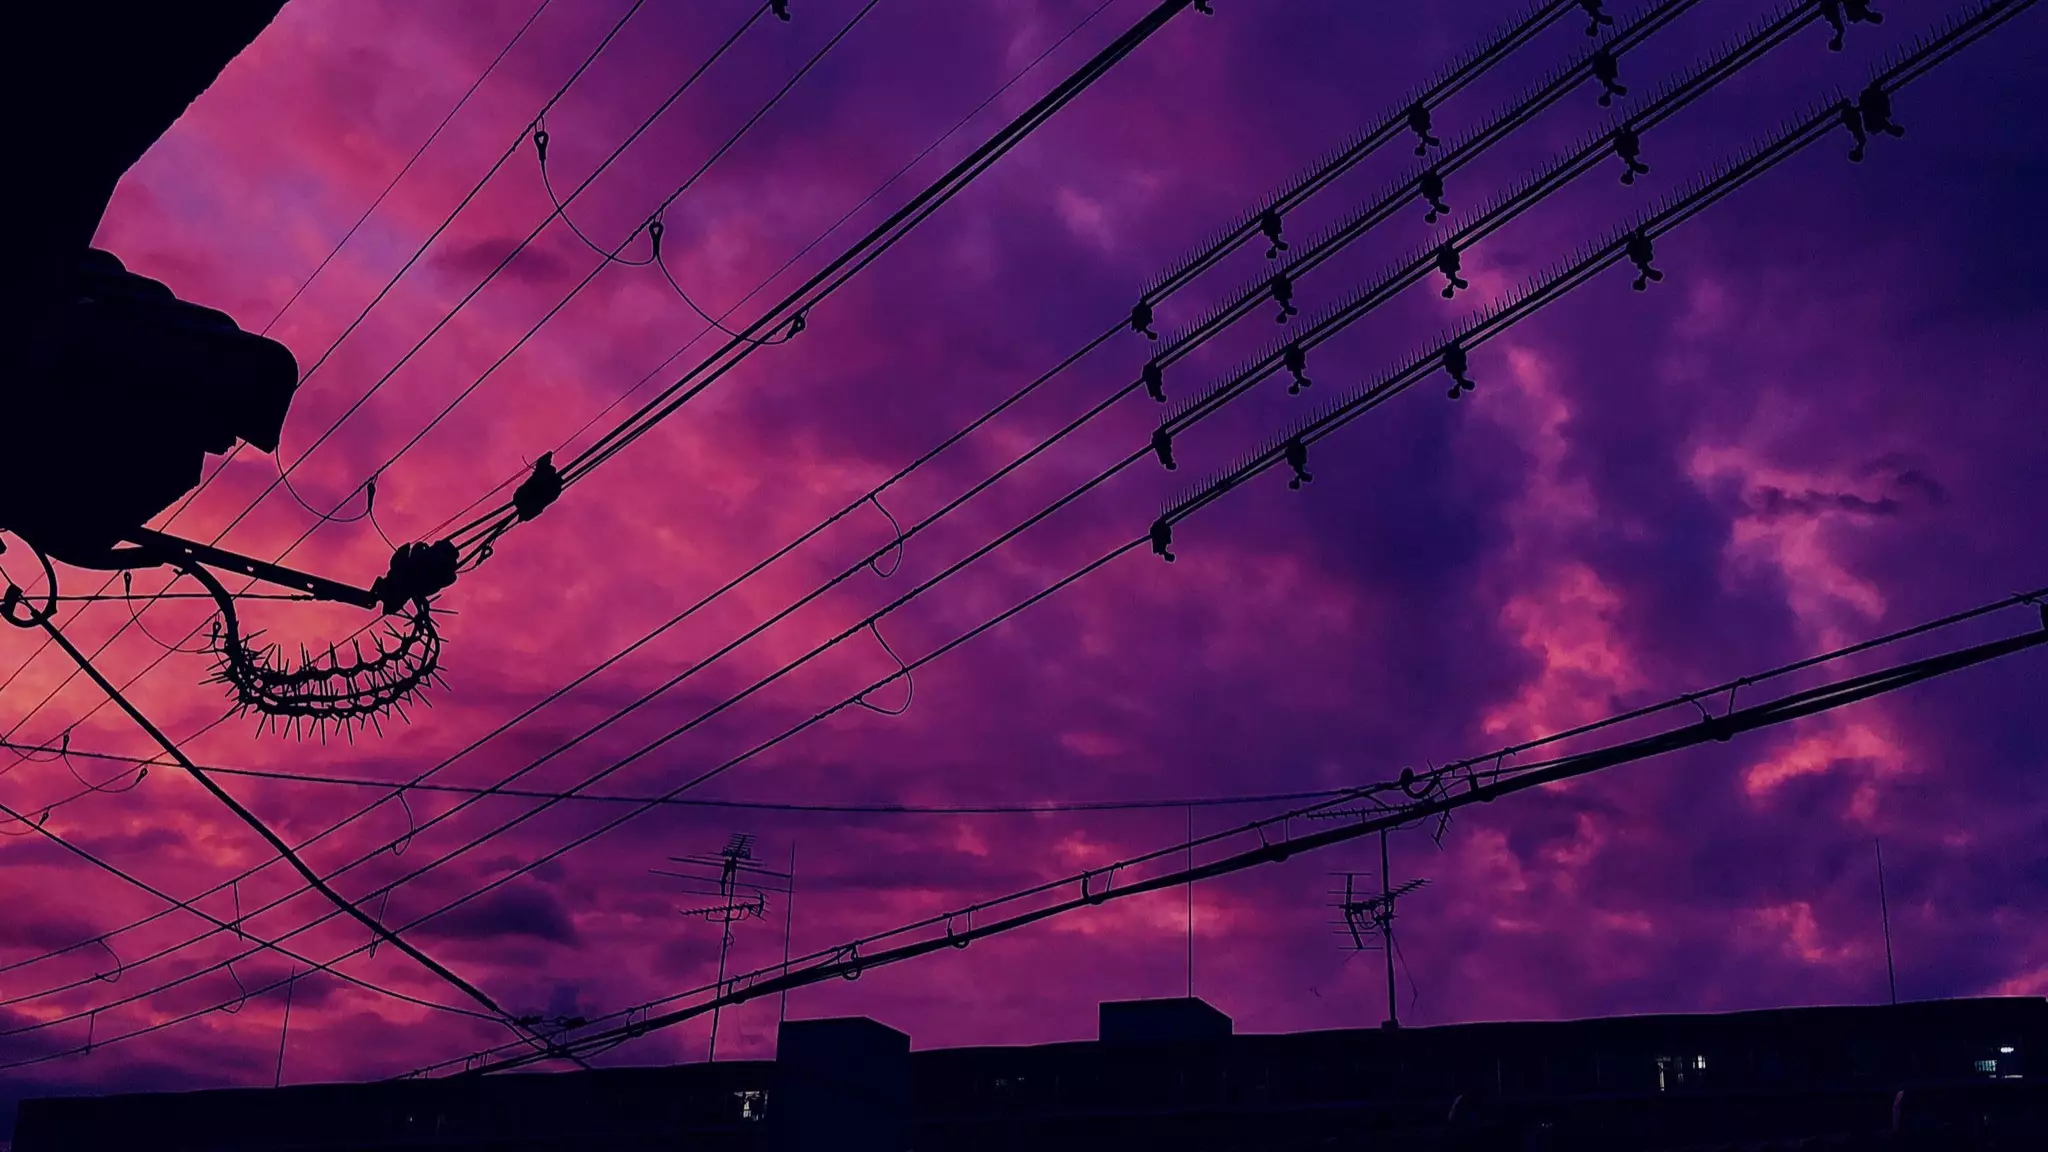 Locals In Japan Share Photos Of Stunning But Ominous Purple Skies Due To Typhoon Hagibis